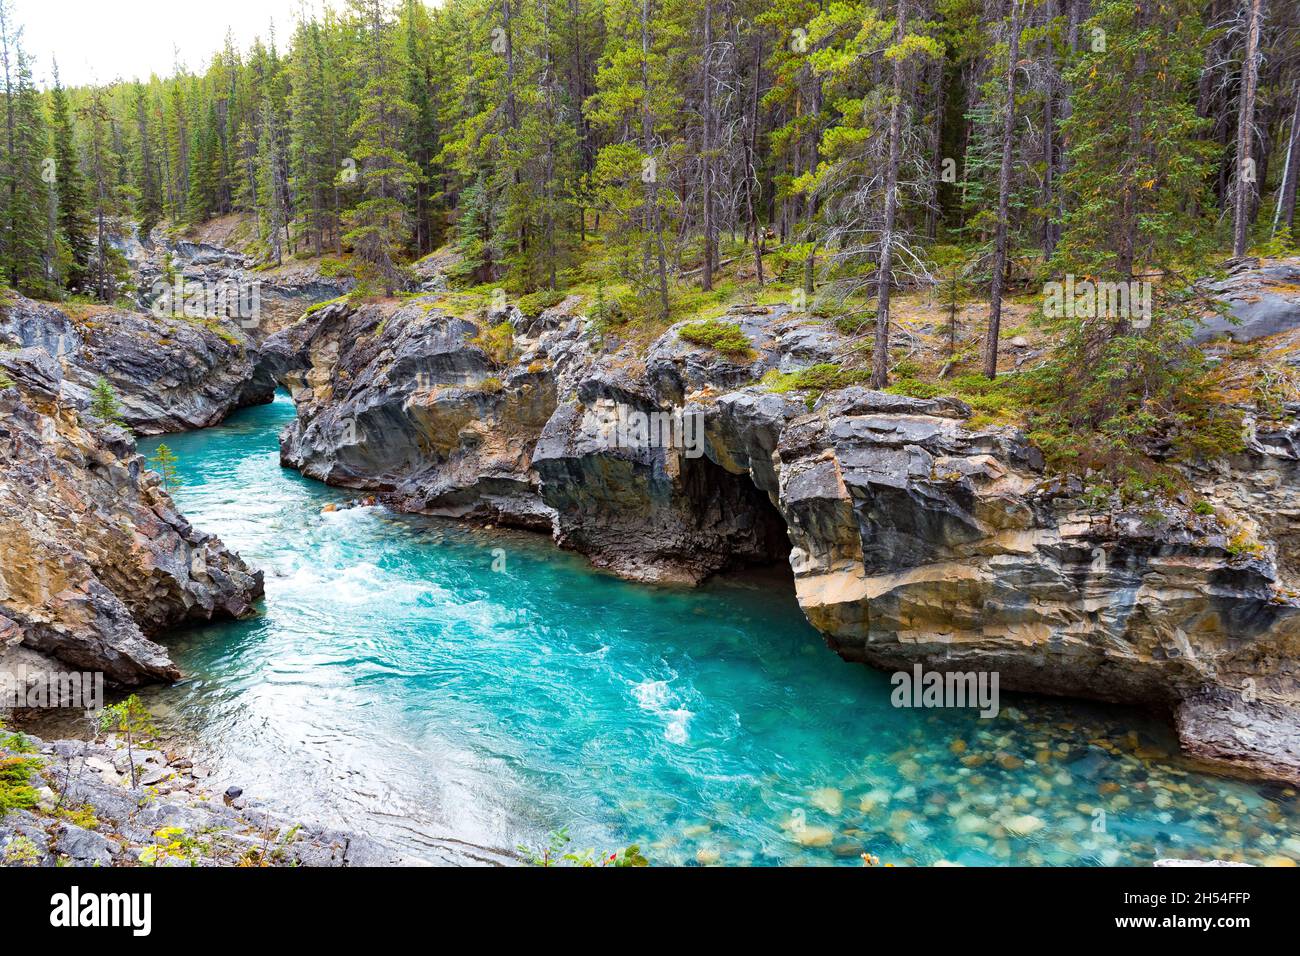 River to Siffleur Falls, bright blue turquoise teal crystal clear water, rocks visible under water, canyon cut through rocks, green needle trees Stock Photo